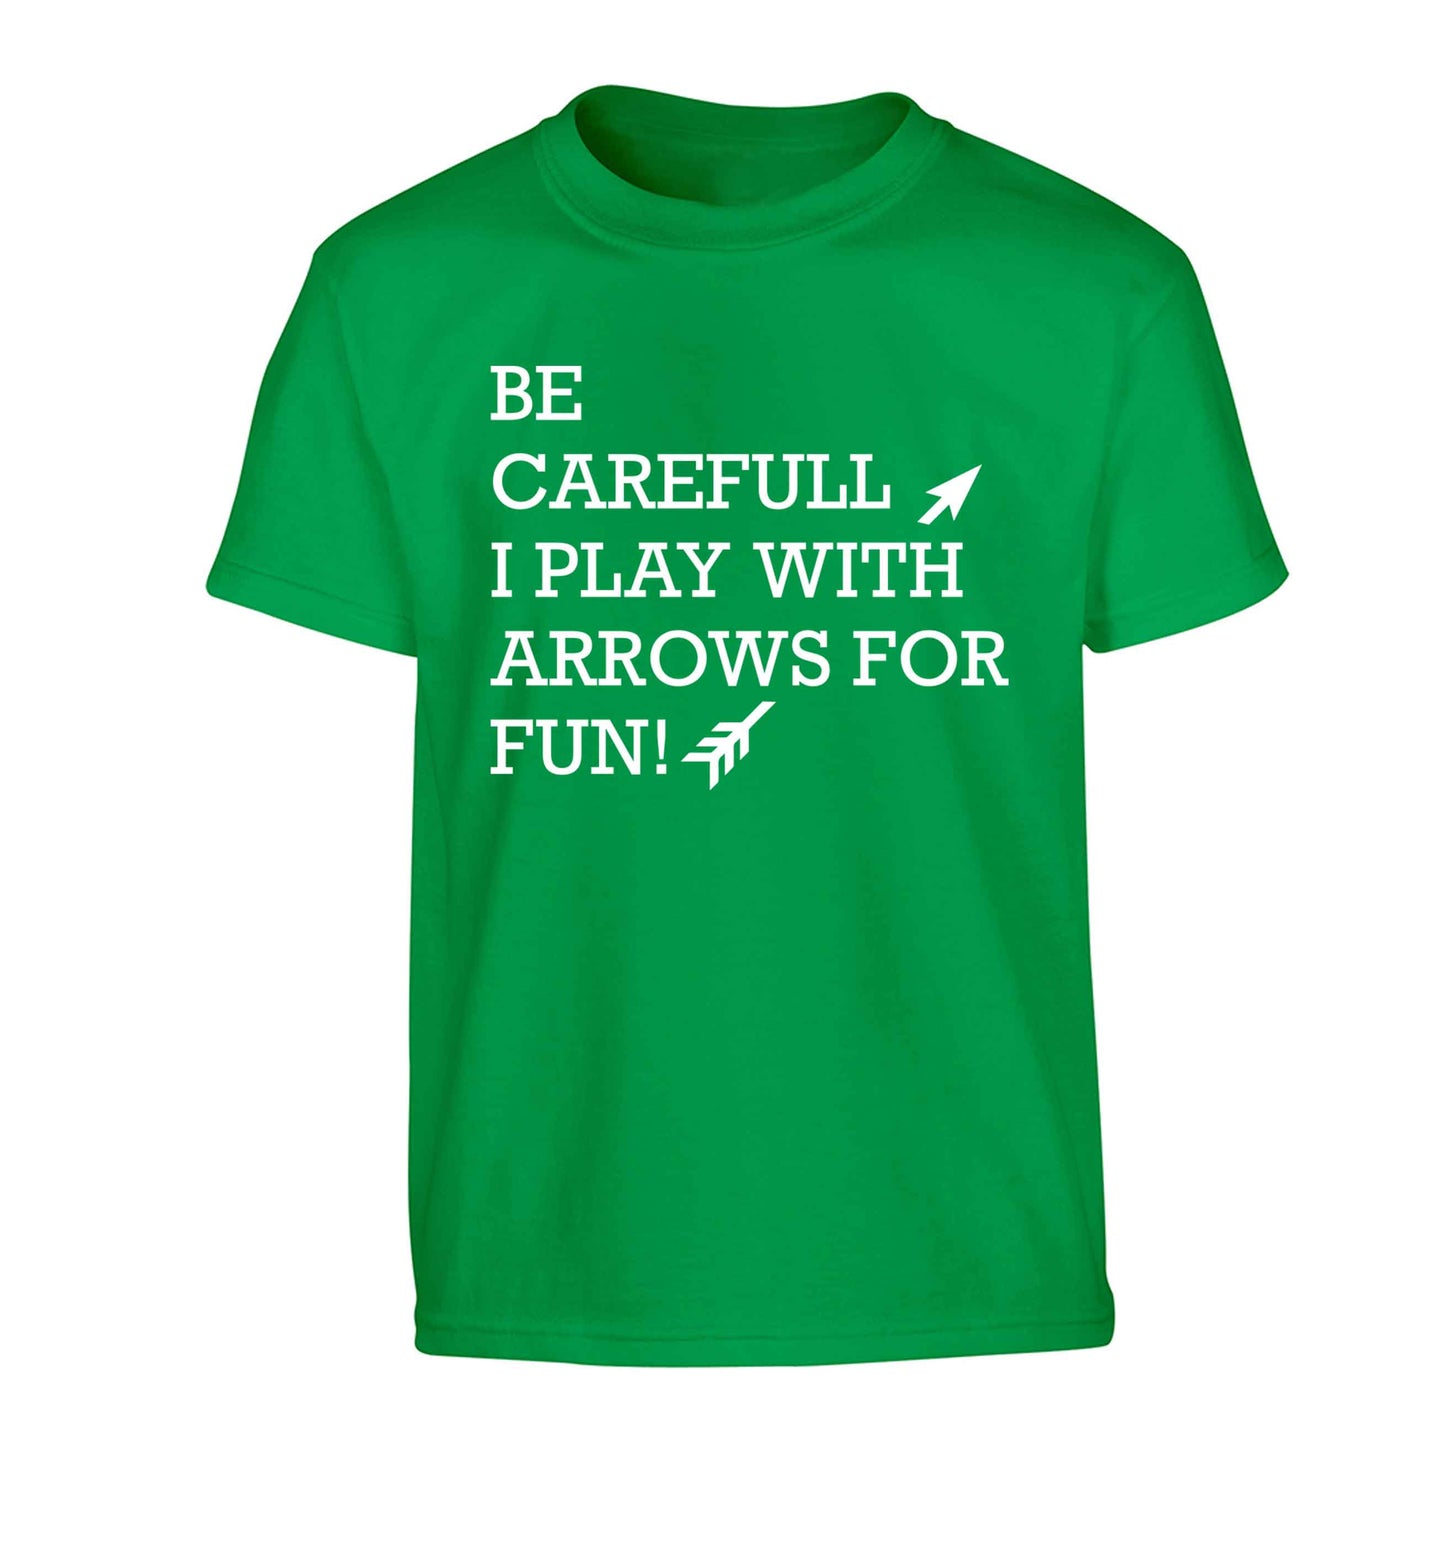 Be carefull I play with arrows for fun Children's green Tshirt 12-13 Years